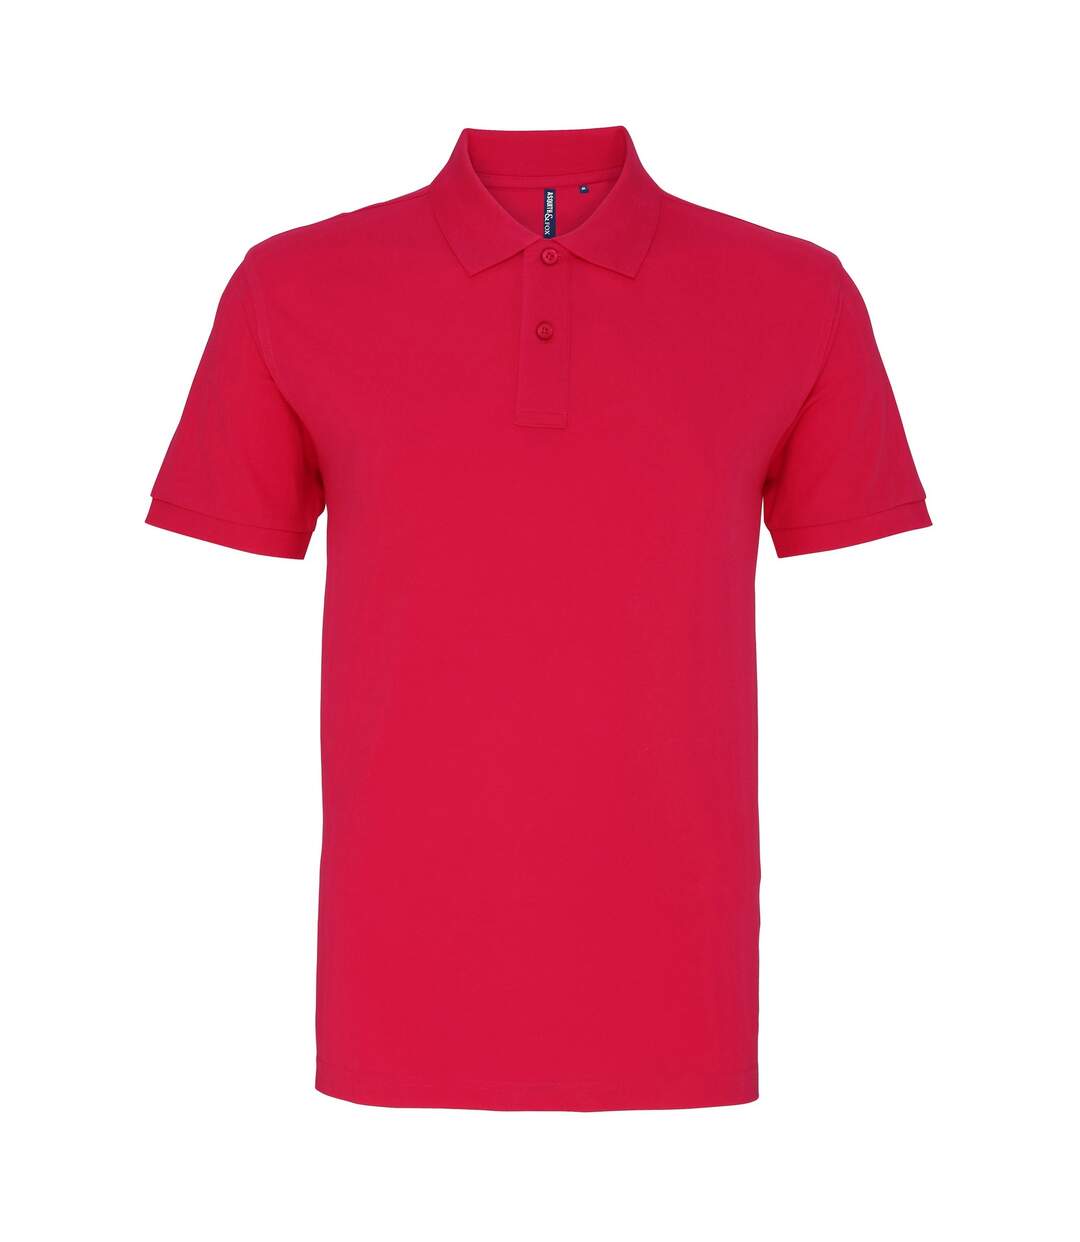 Asquith & Fox - Polo manches courtes - Homme (Rose) - UTRW3471